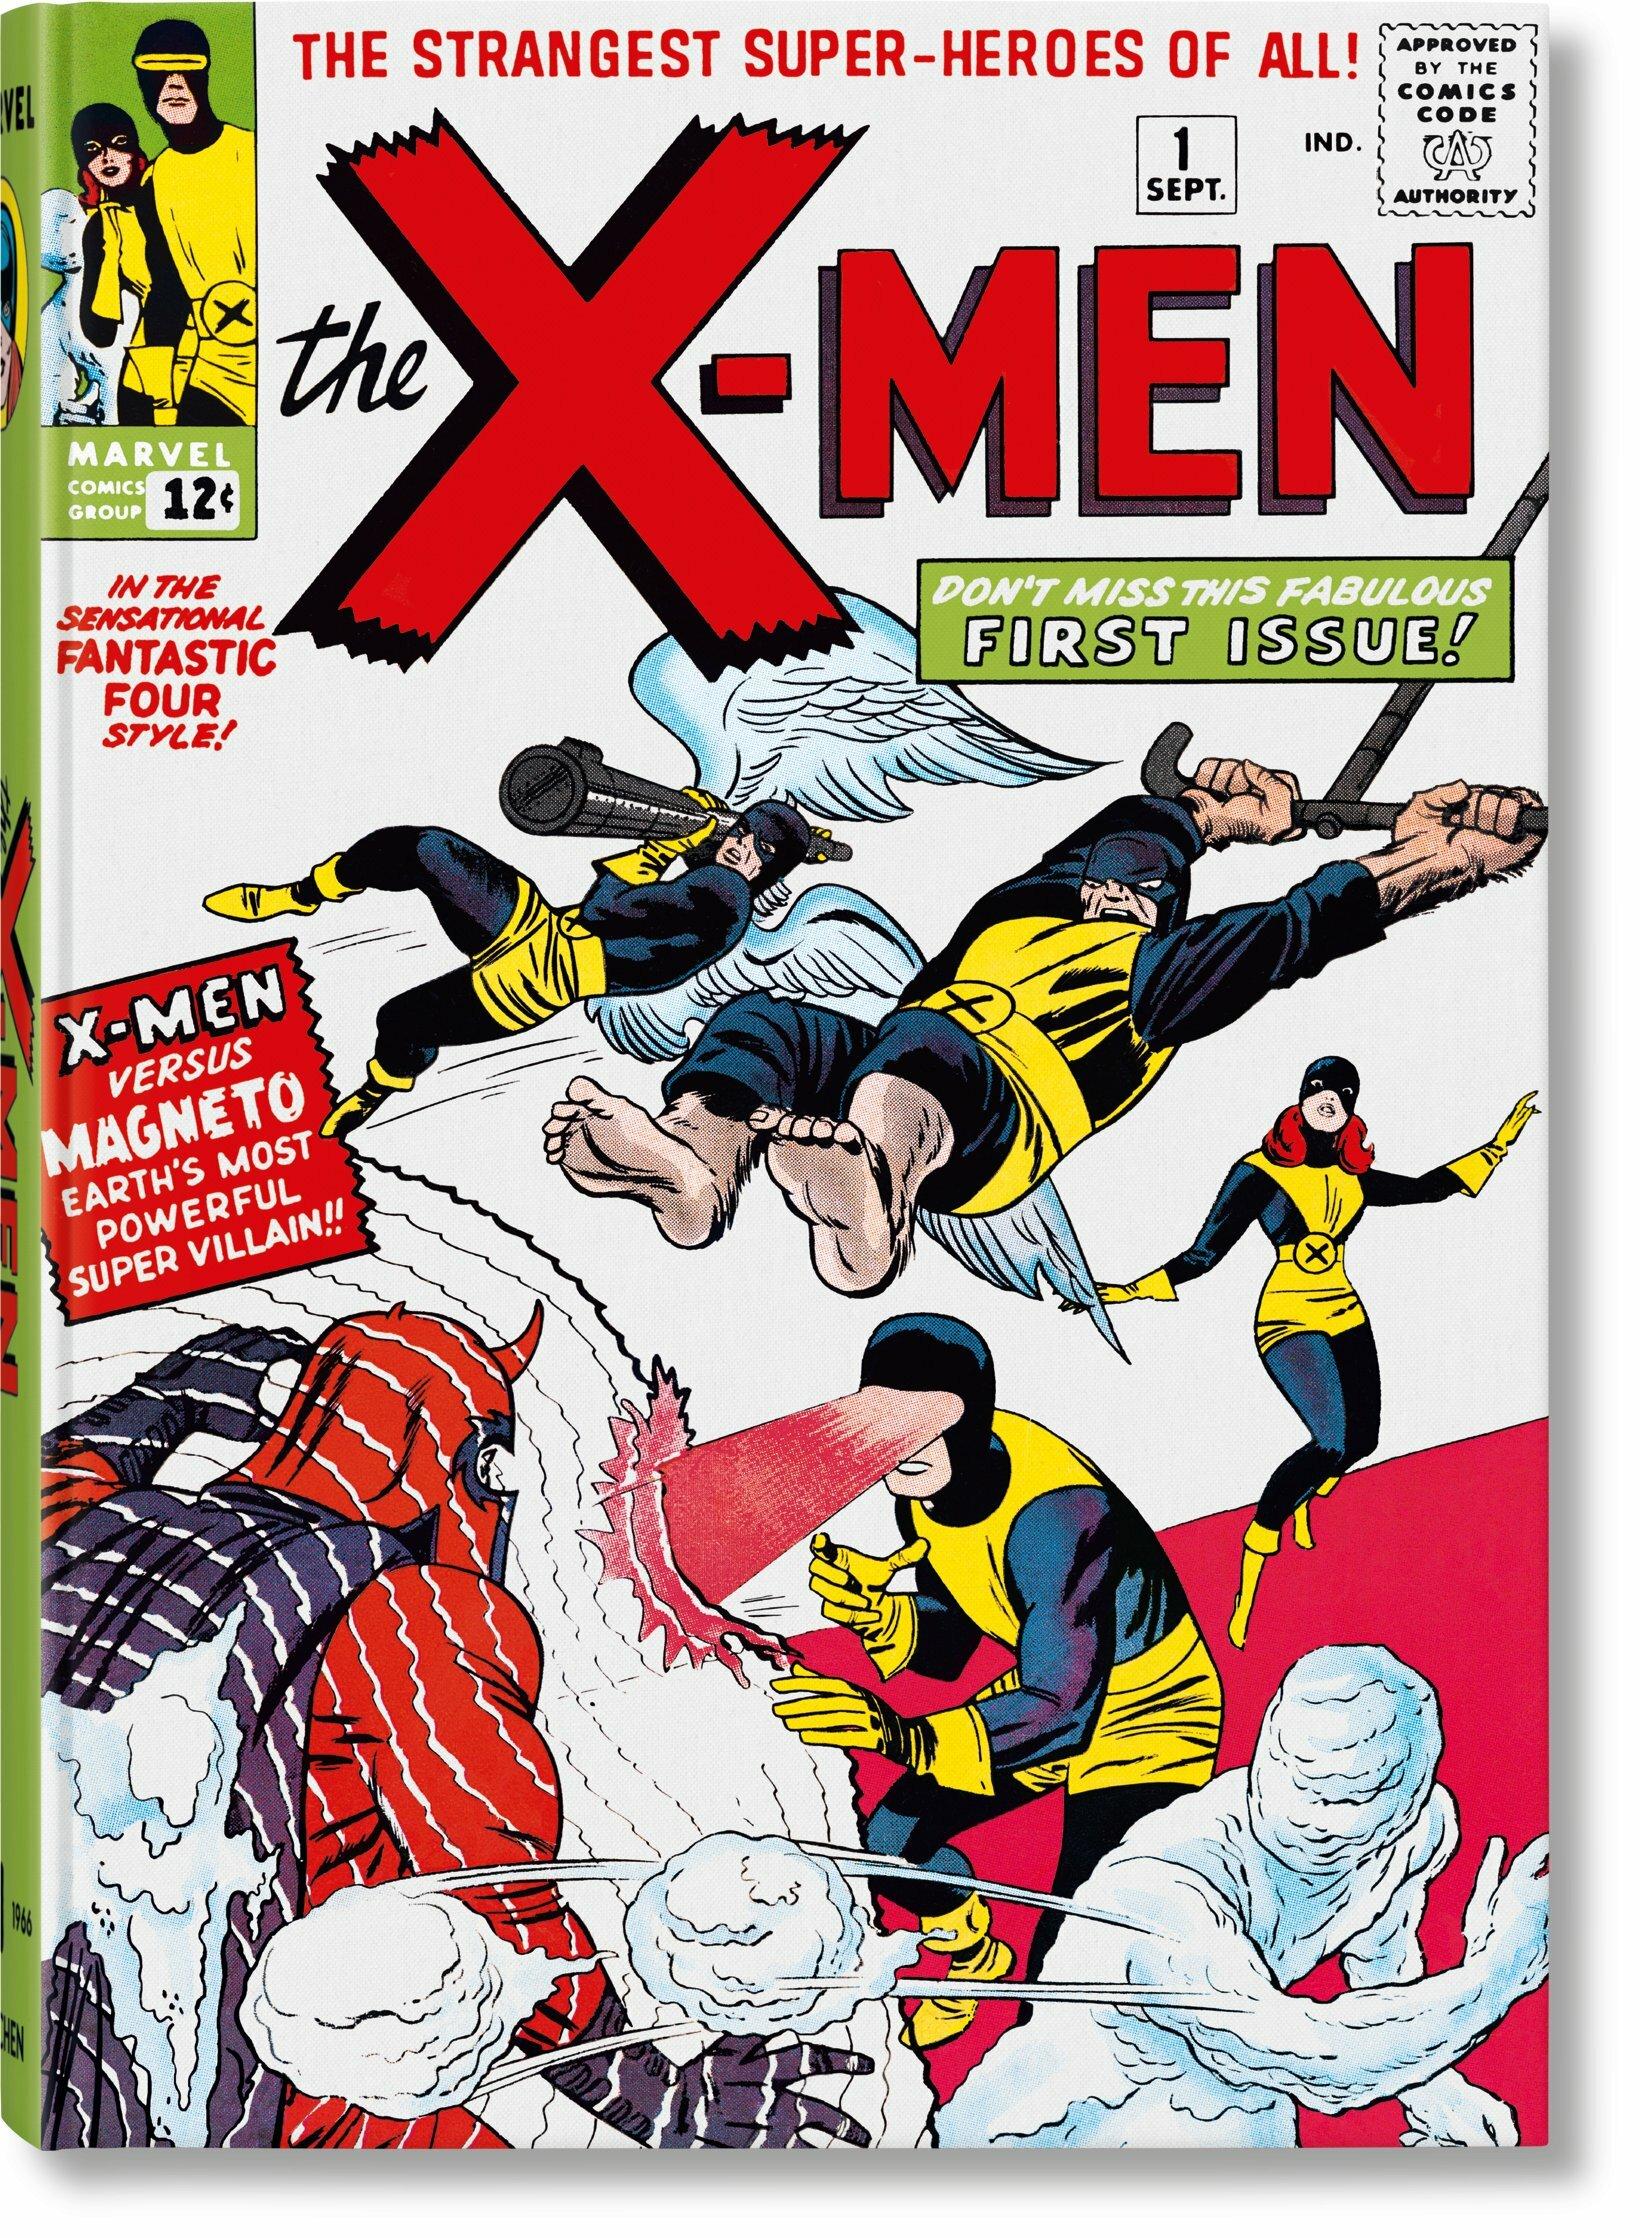 The Strangest Super-Heroes of All. The foundation of a pop-culture phenomenon.

When Marvel publisher Martin Goodman asked Stan Lee to deliver another new team book for his line of comics, he had no idea he’d be getting something like The X-Men.